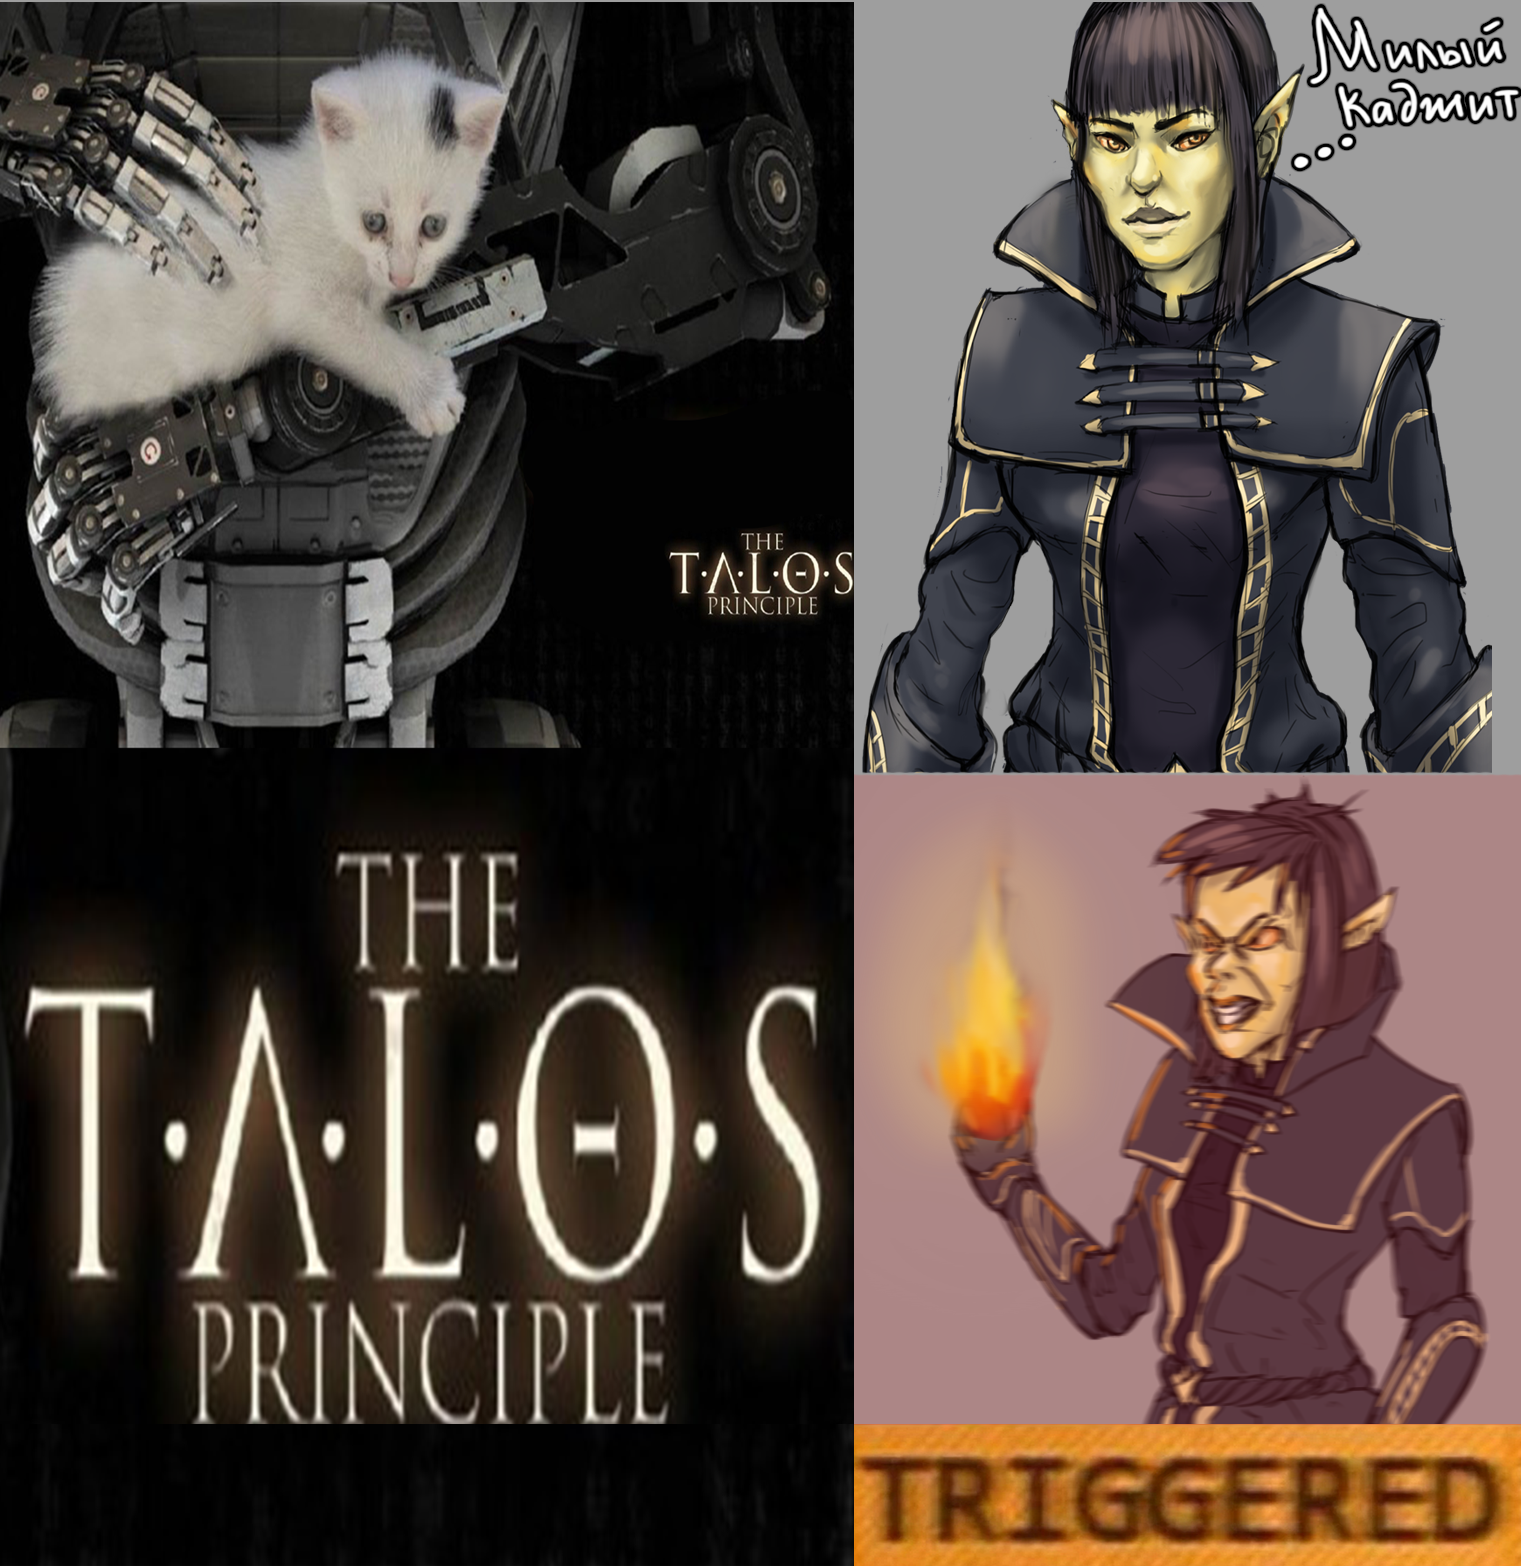 Made a meme with my character - My, Skyrim, , The elder scrolls, Triggered, Memes, Drawing, The Talos Principle, Elves, The Elder Scrolls V: Skyrim